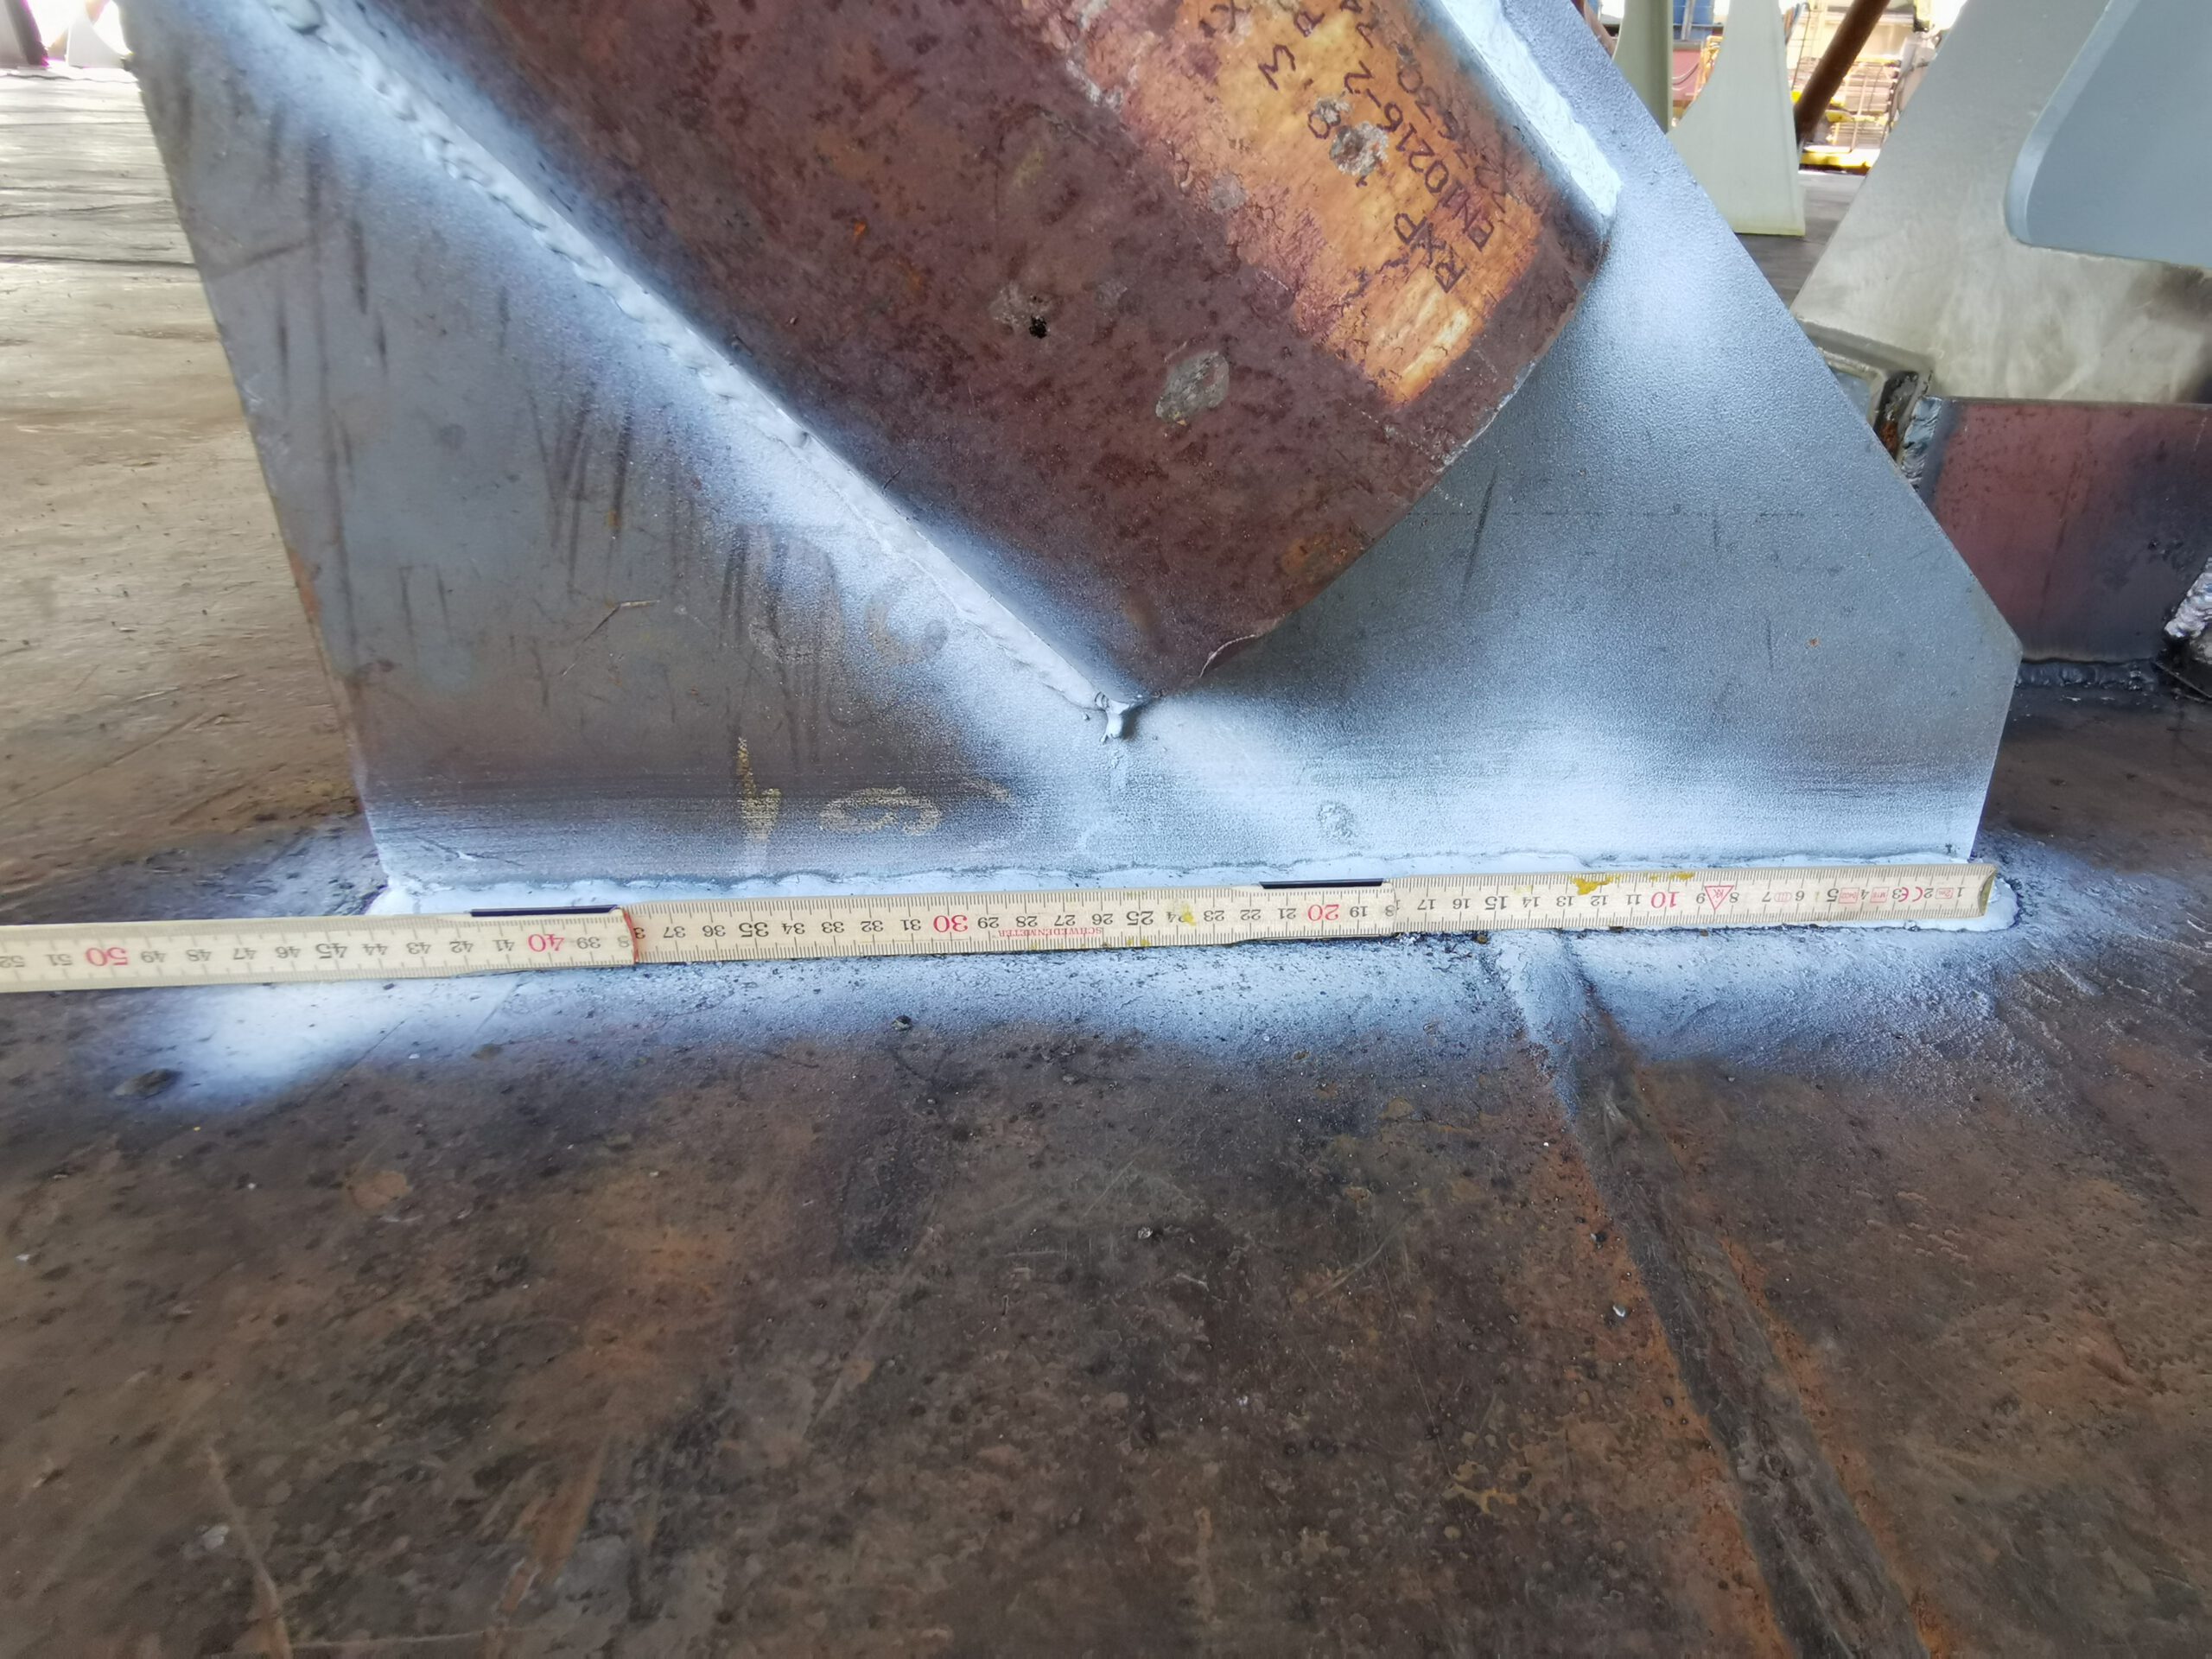 Checking the length of a weld seam on the deck of a ship